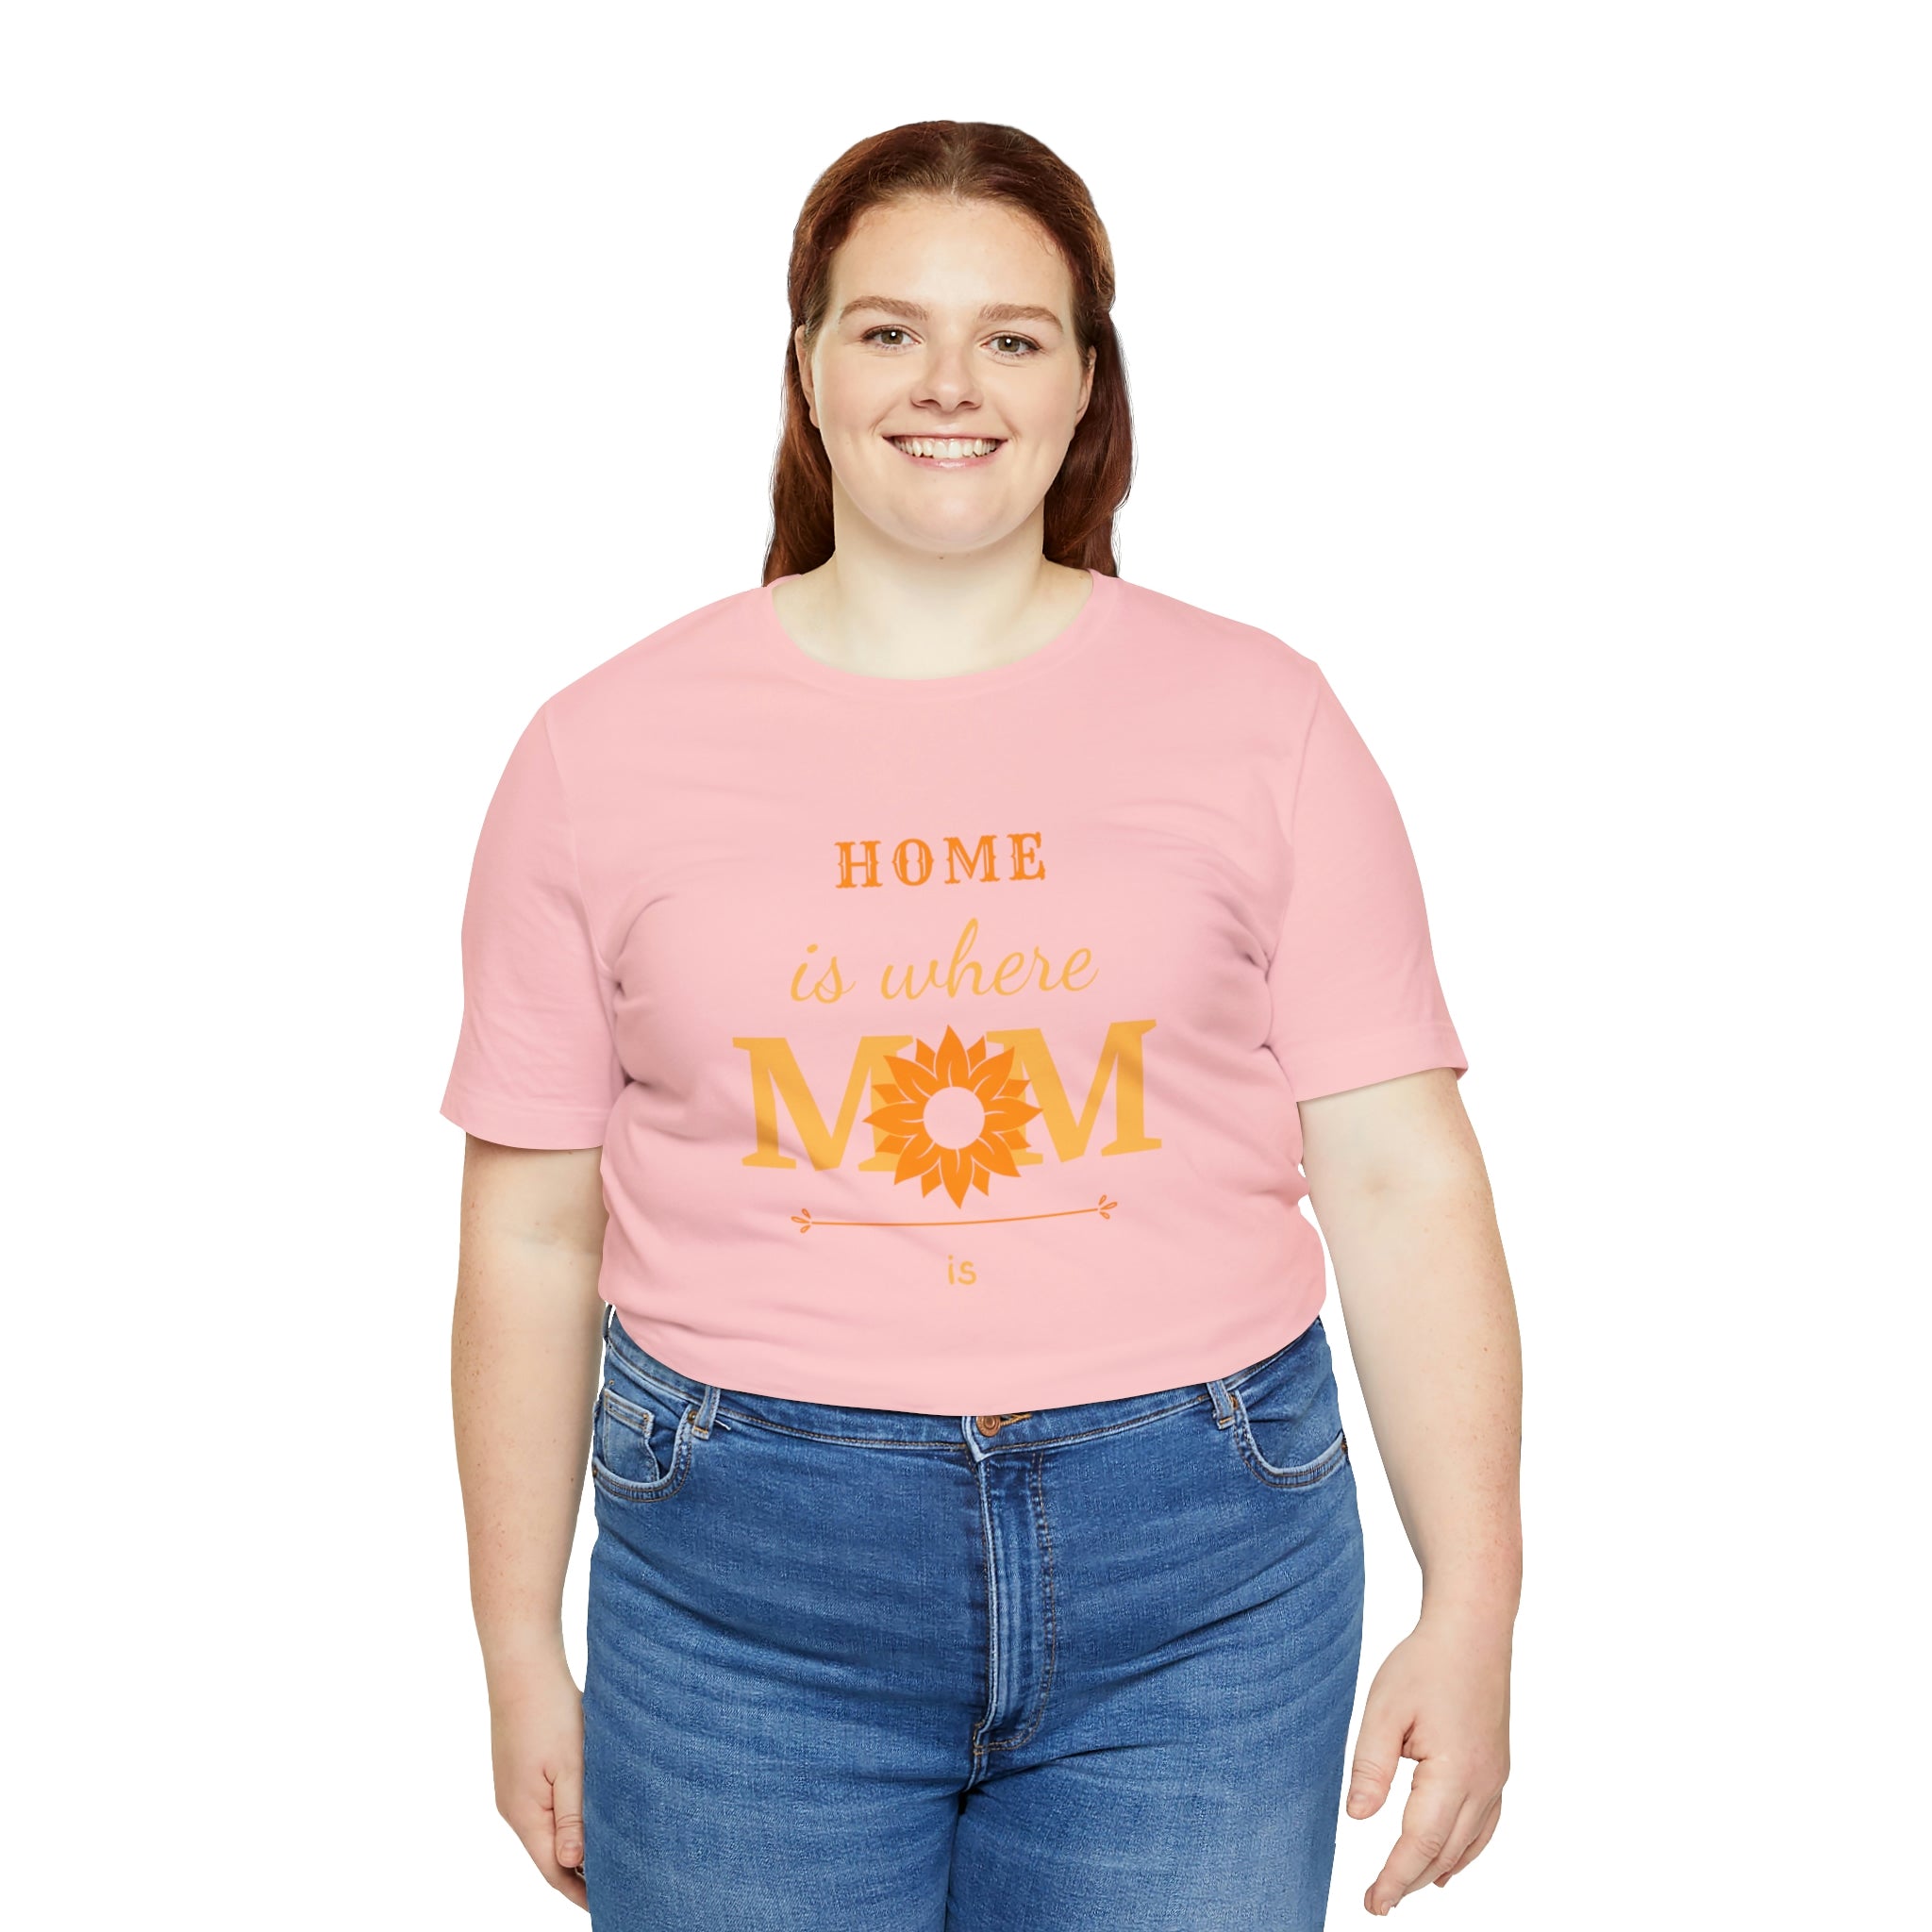 Home Is Where Mom Is Women T-shirt.